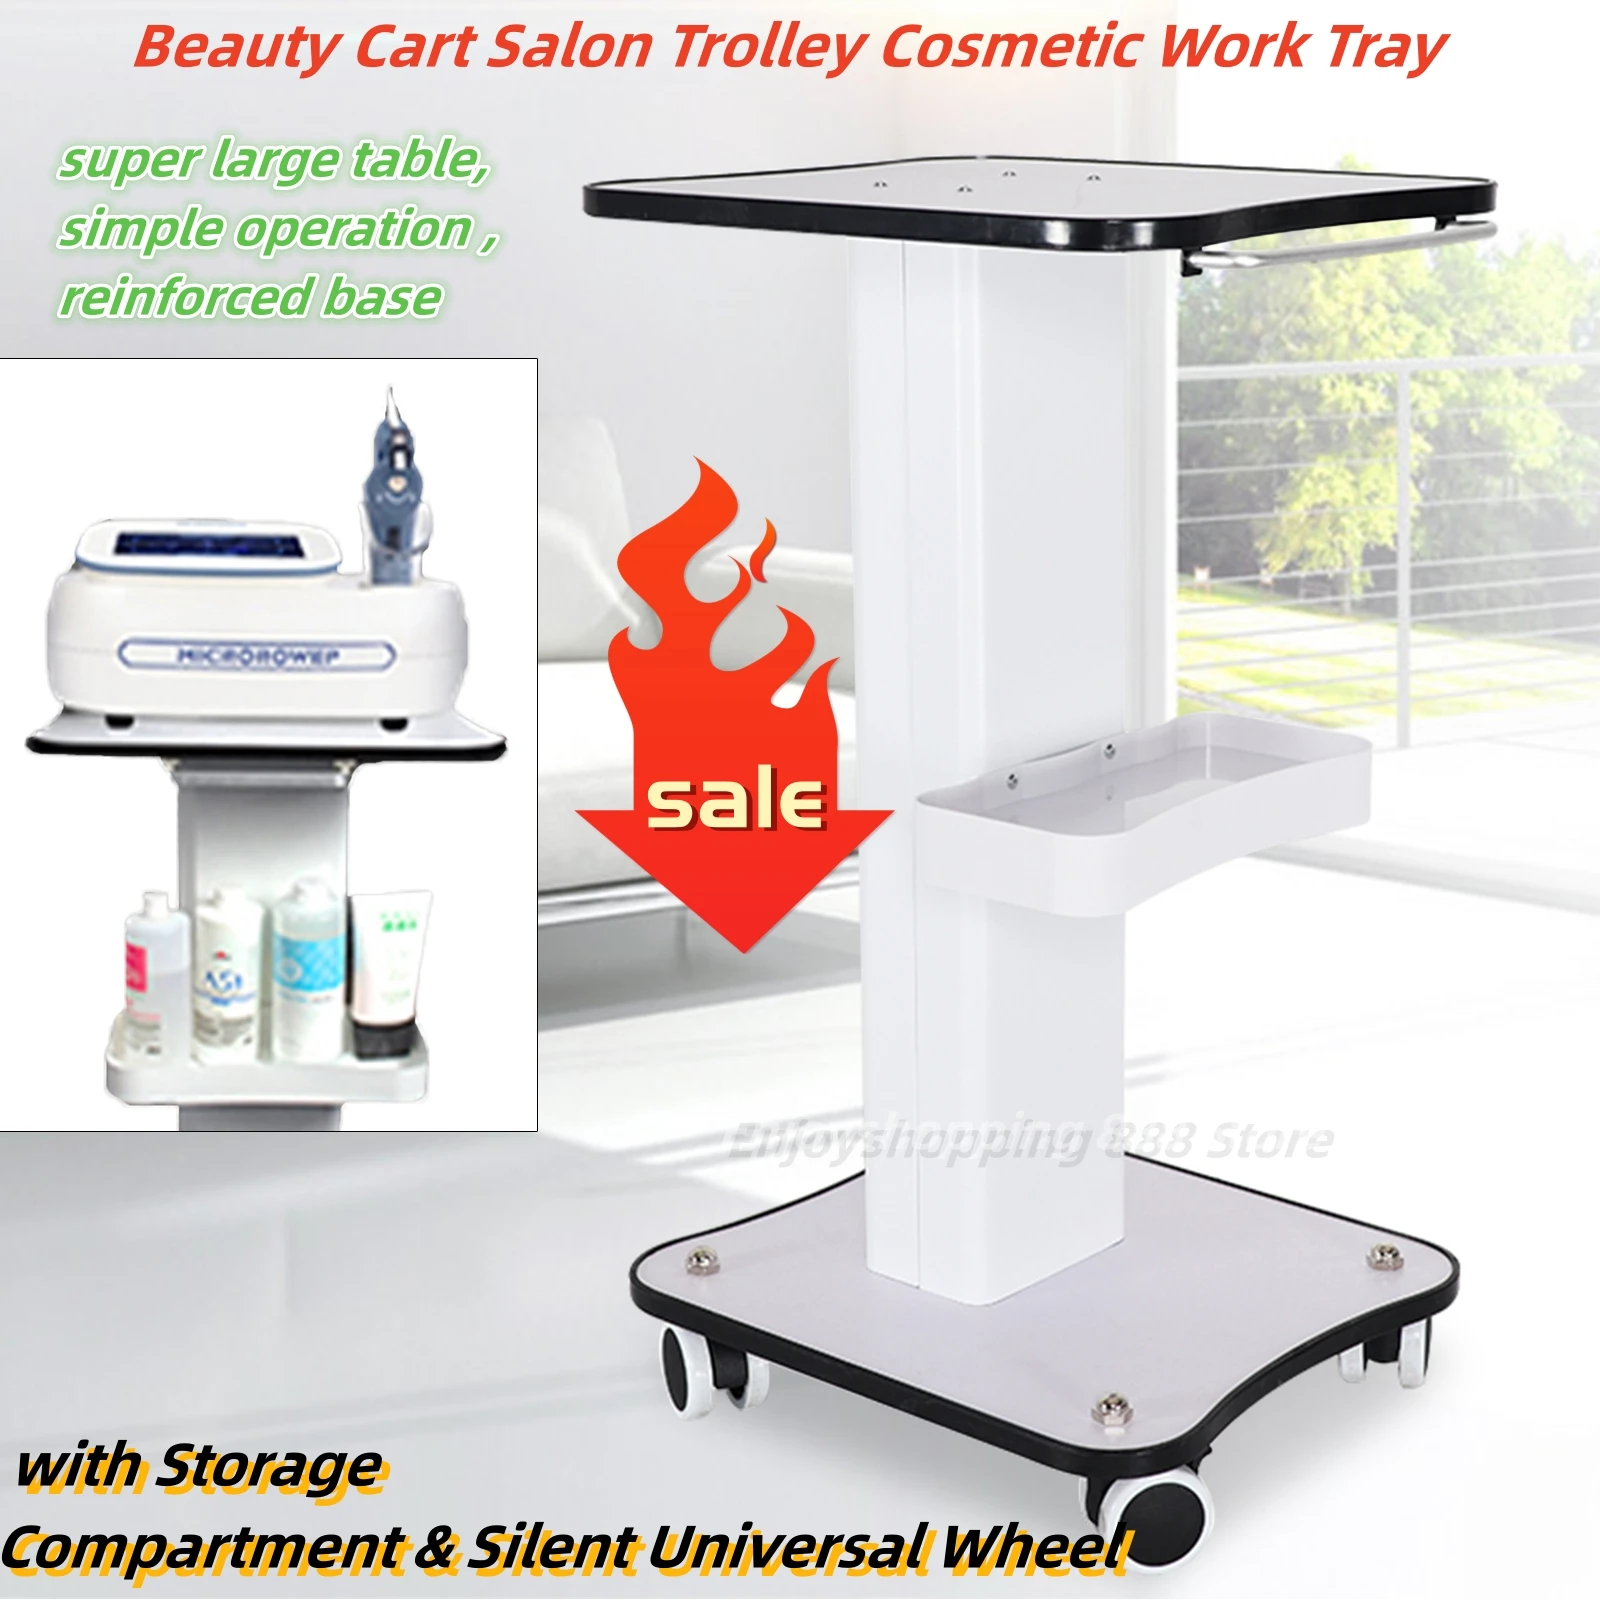 Beauty Cart Salon Trolley Cosmetic Work Tray with Storage Compartment & Silent Universal Wheel